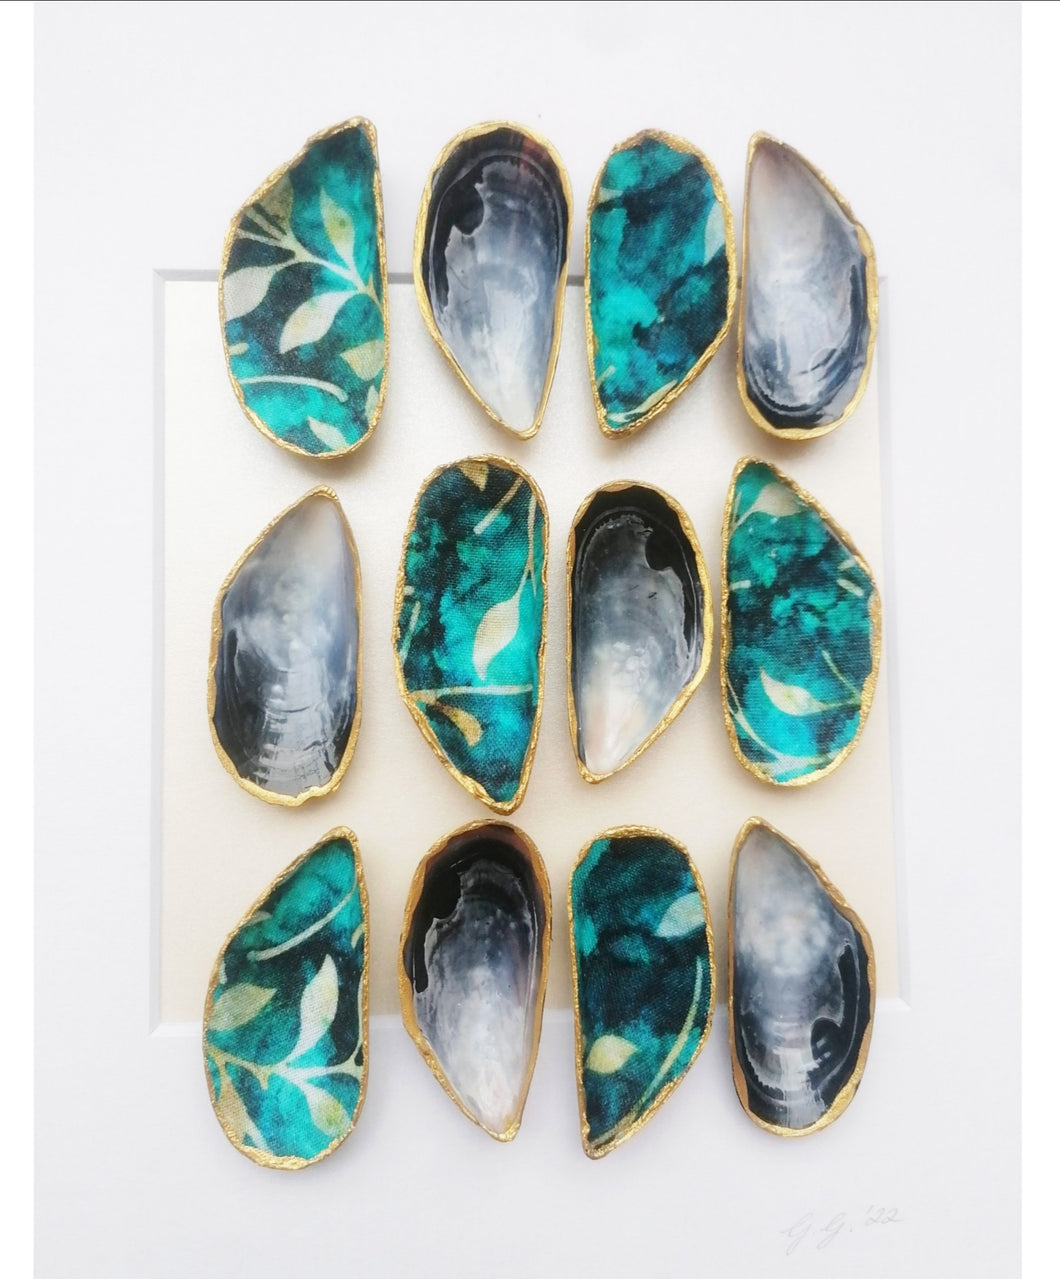 shell art Irish design Irish craft made local handmade in Ireland mussel shells fabric unique gift new home gift colourful art teal and gold 